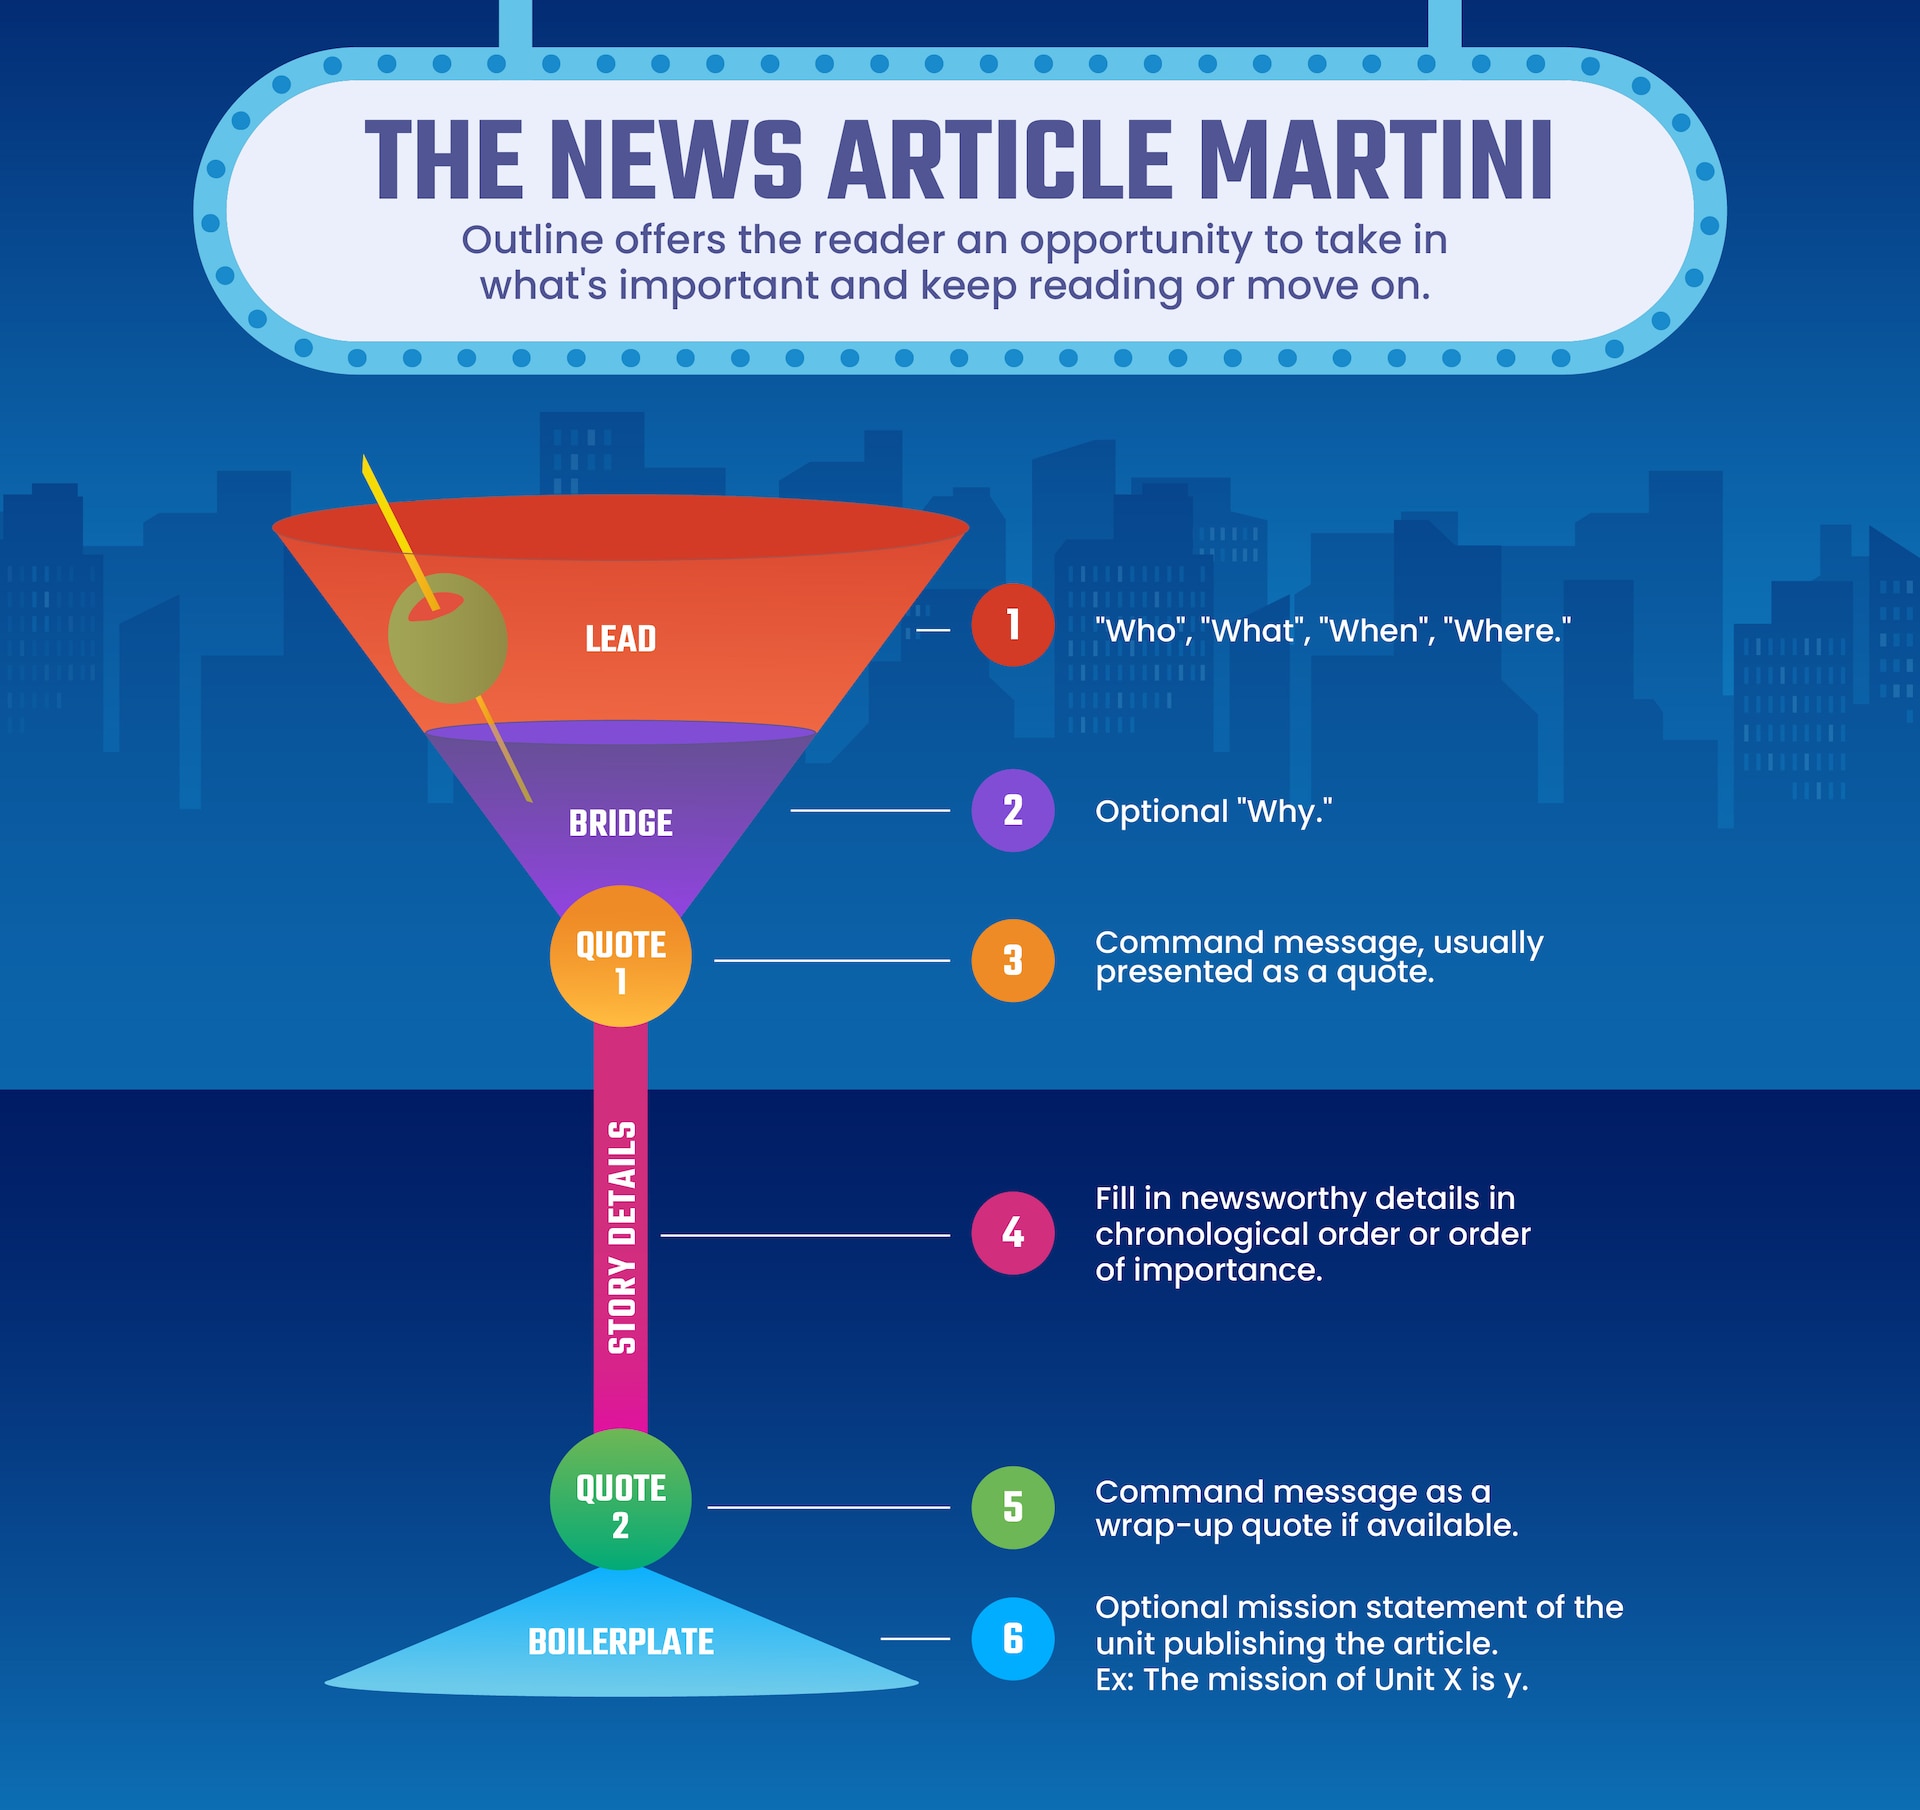 Graphic depicting news article structure as a martini glass with a cone containing the lead, the bridge and a quote, the stem with additional story details and another quote and a boilerplate statement. "The News Article Martini offers the reader the opportunity to take in what's important and keep reading or move on."